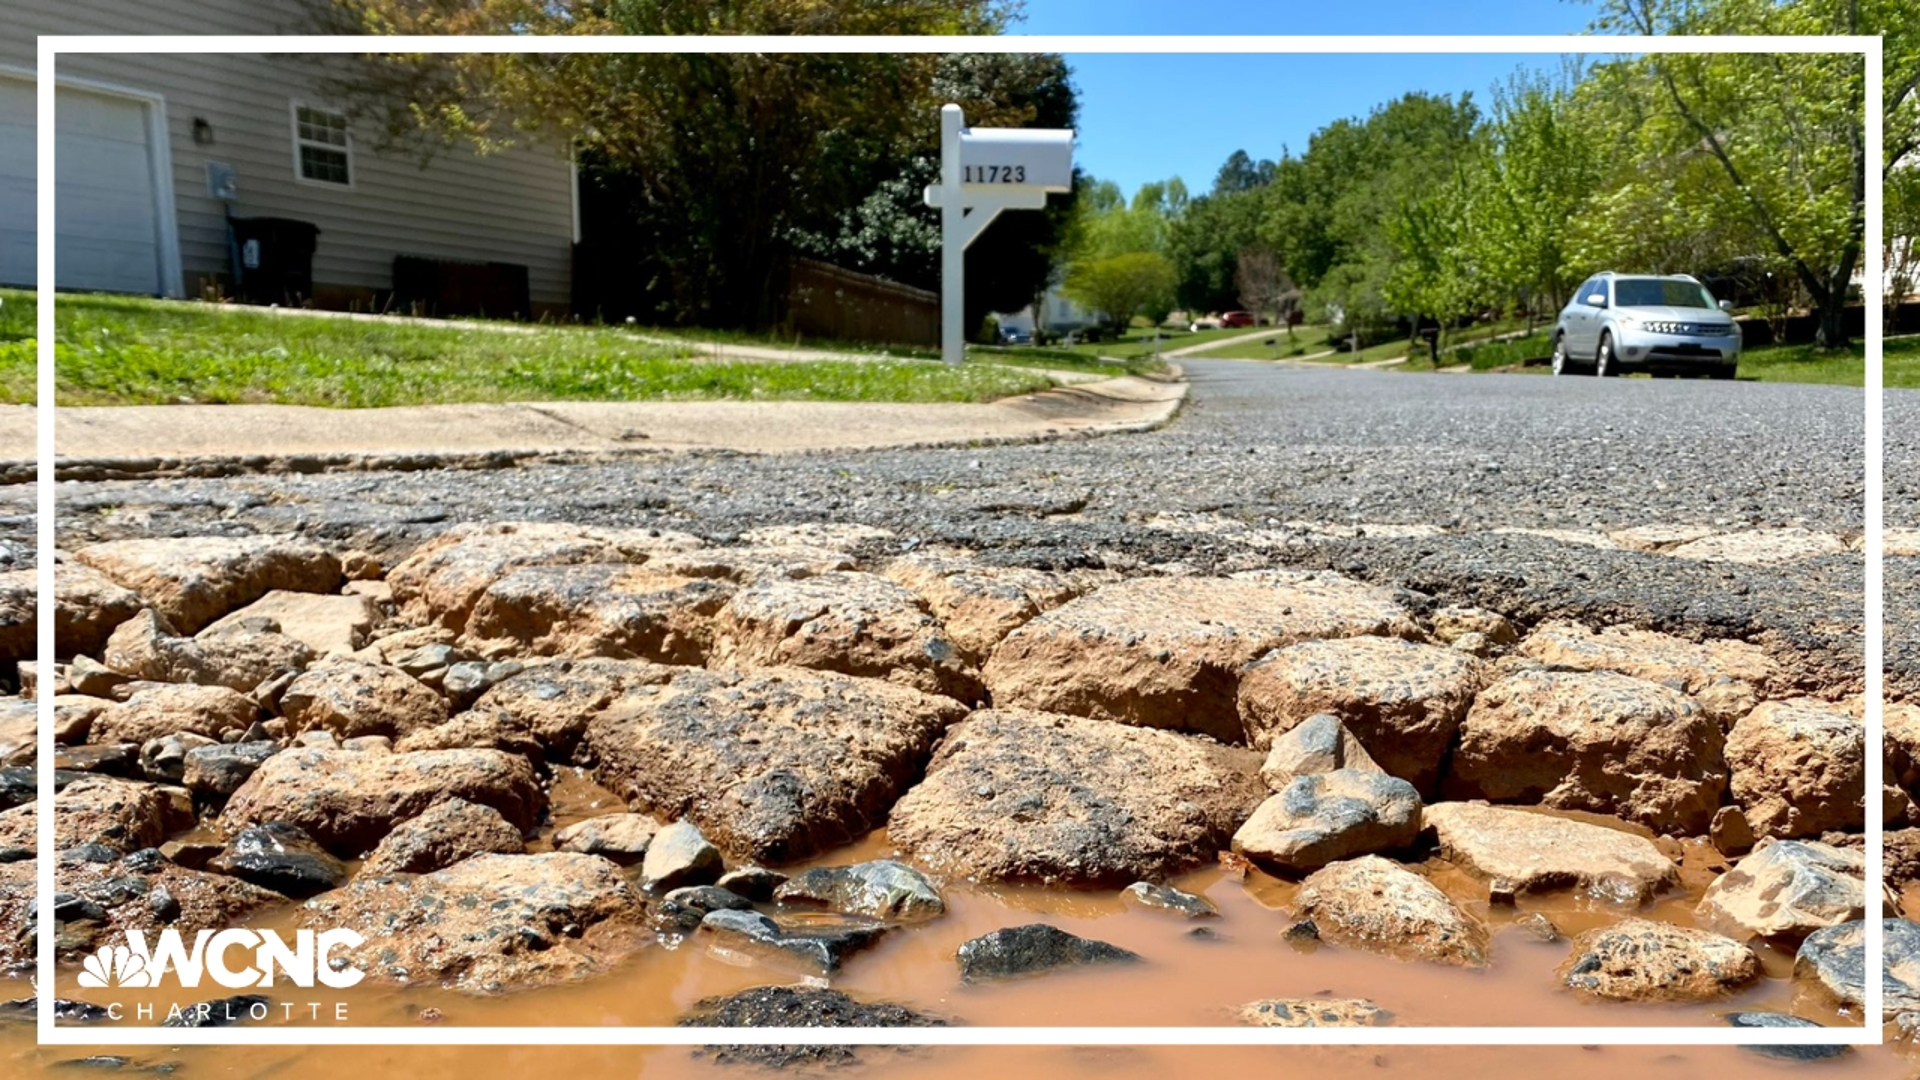 Orphan roads are publicly used roads that aren’t maintained by public dollars.